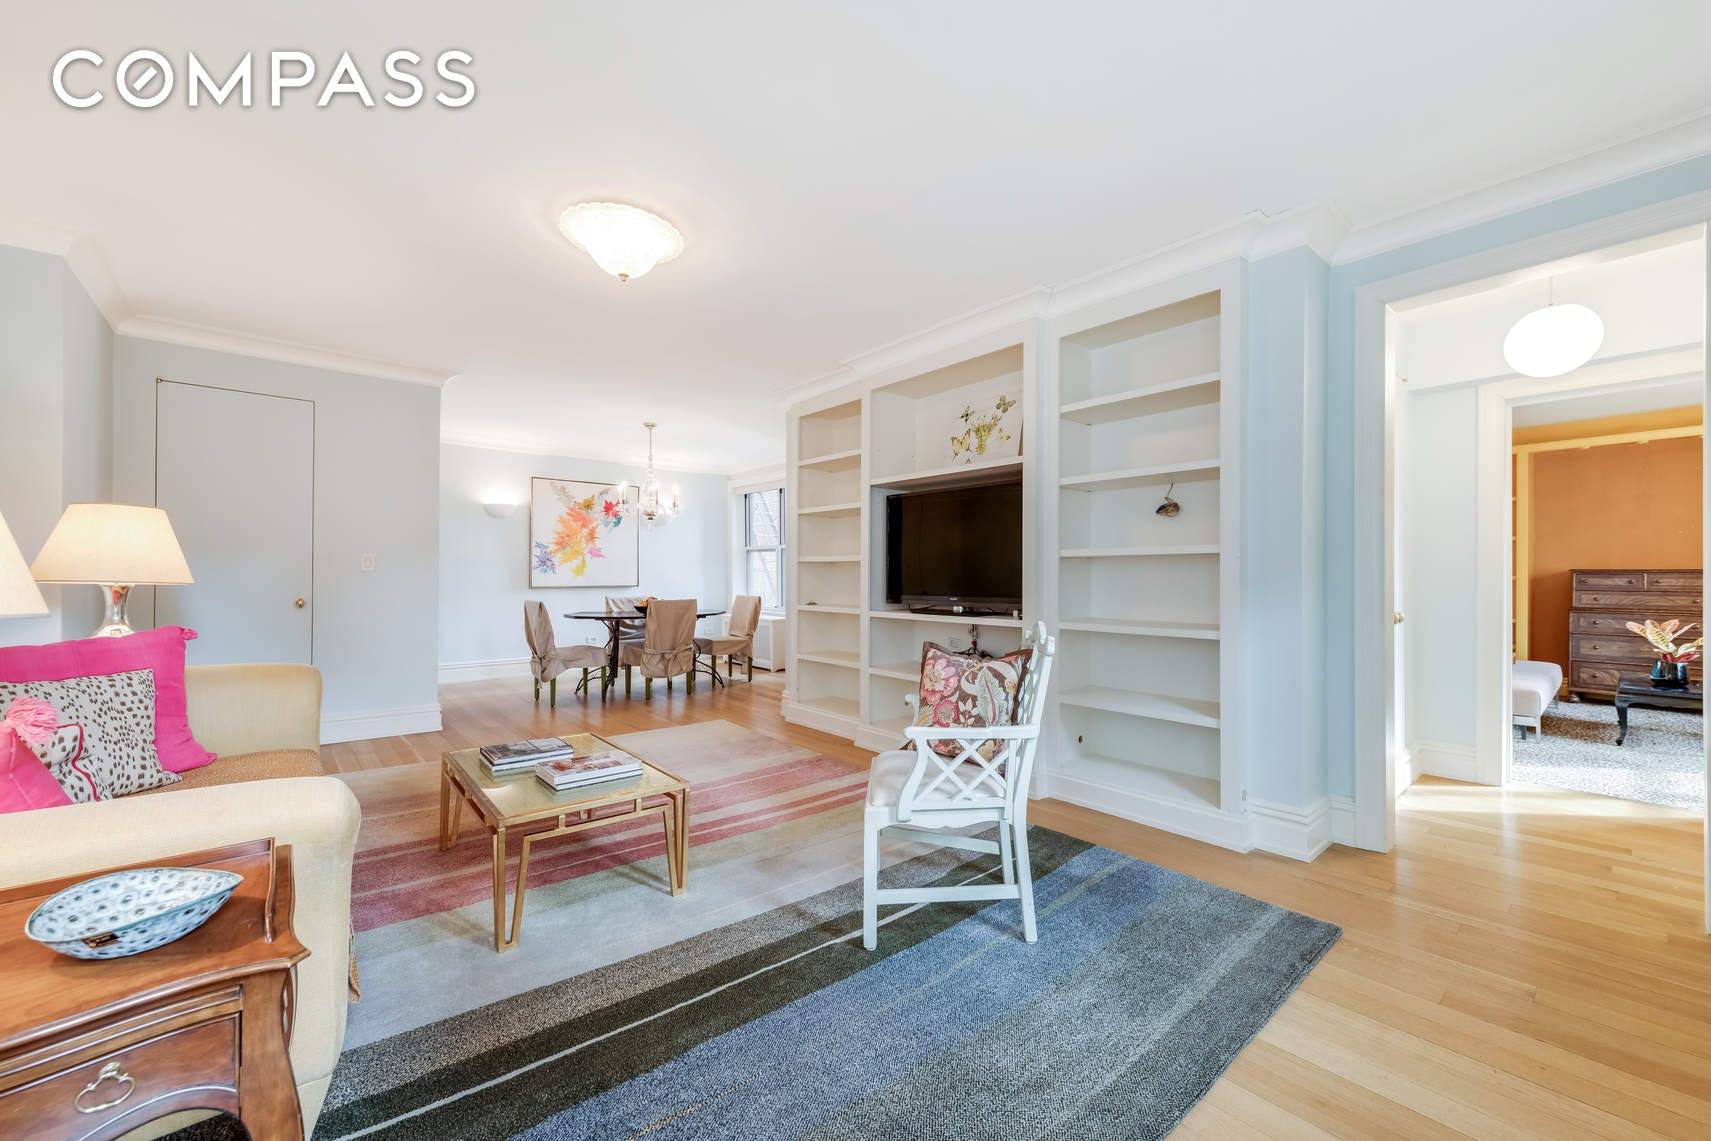 Large renovated pre war 2 bedroom, 2 full bath cooperative apartment is a quiet oasis in the historic Brooklyn Heights neighborhood.